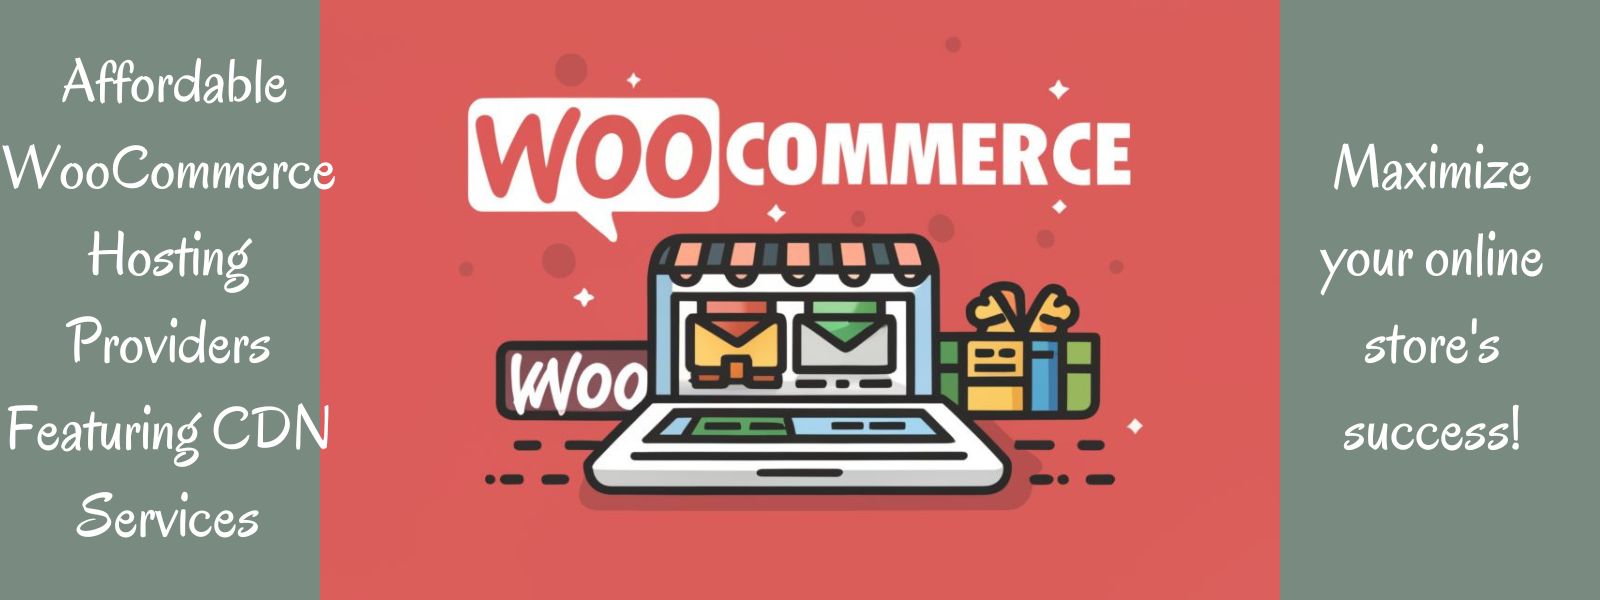 Affordable WooCommerce hosting providers with CDN